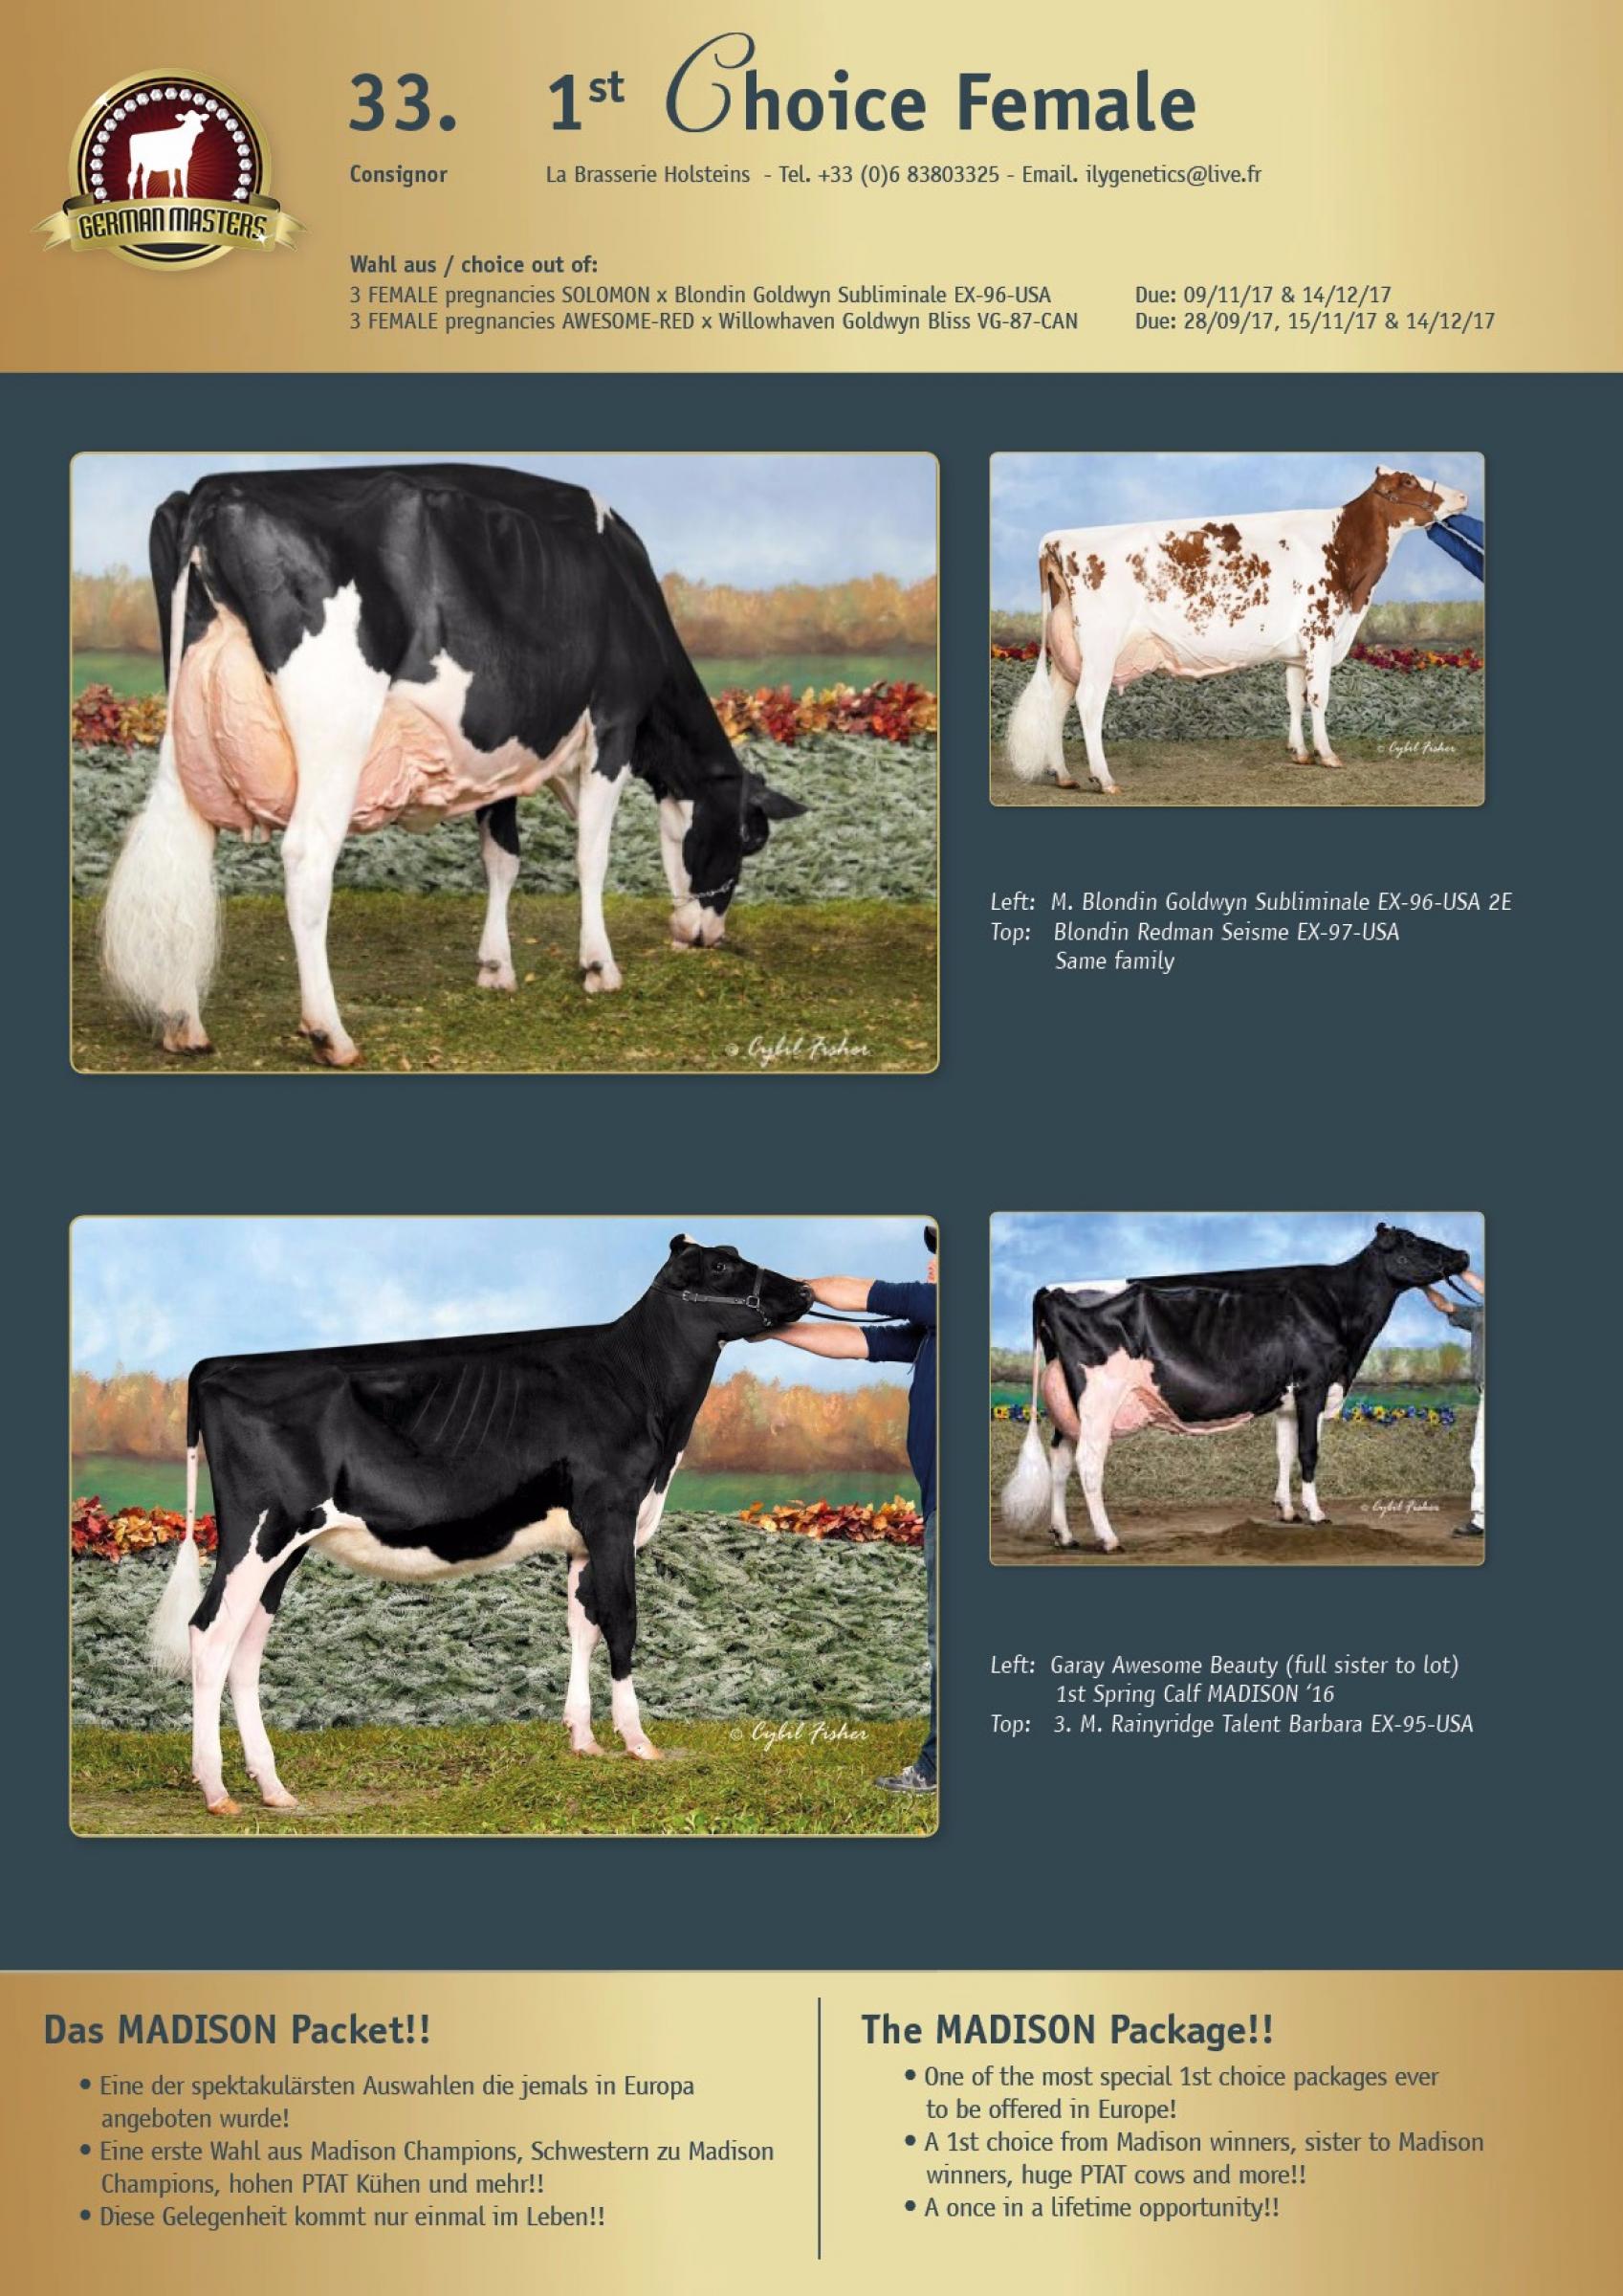 Datasheet for Lot 33. 1st Choice Female: The MADISON package!